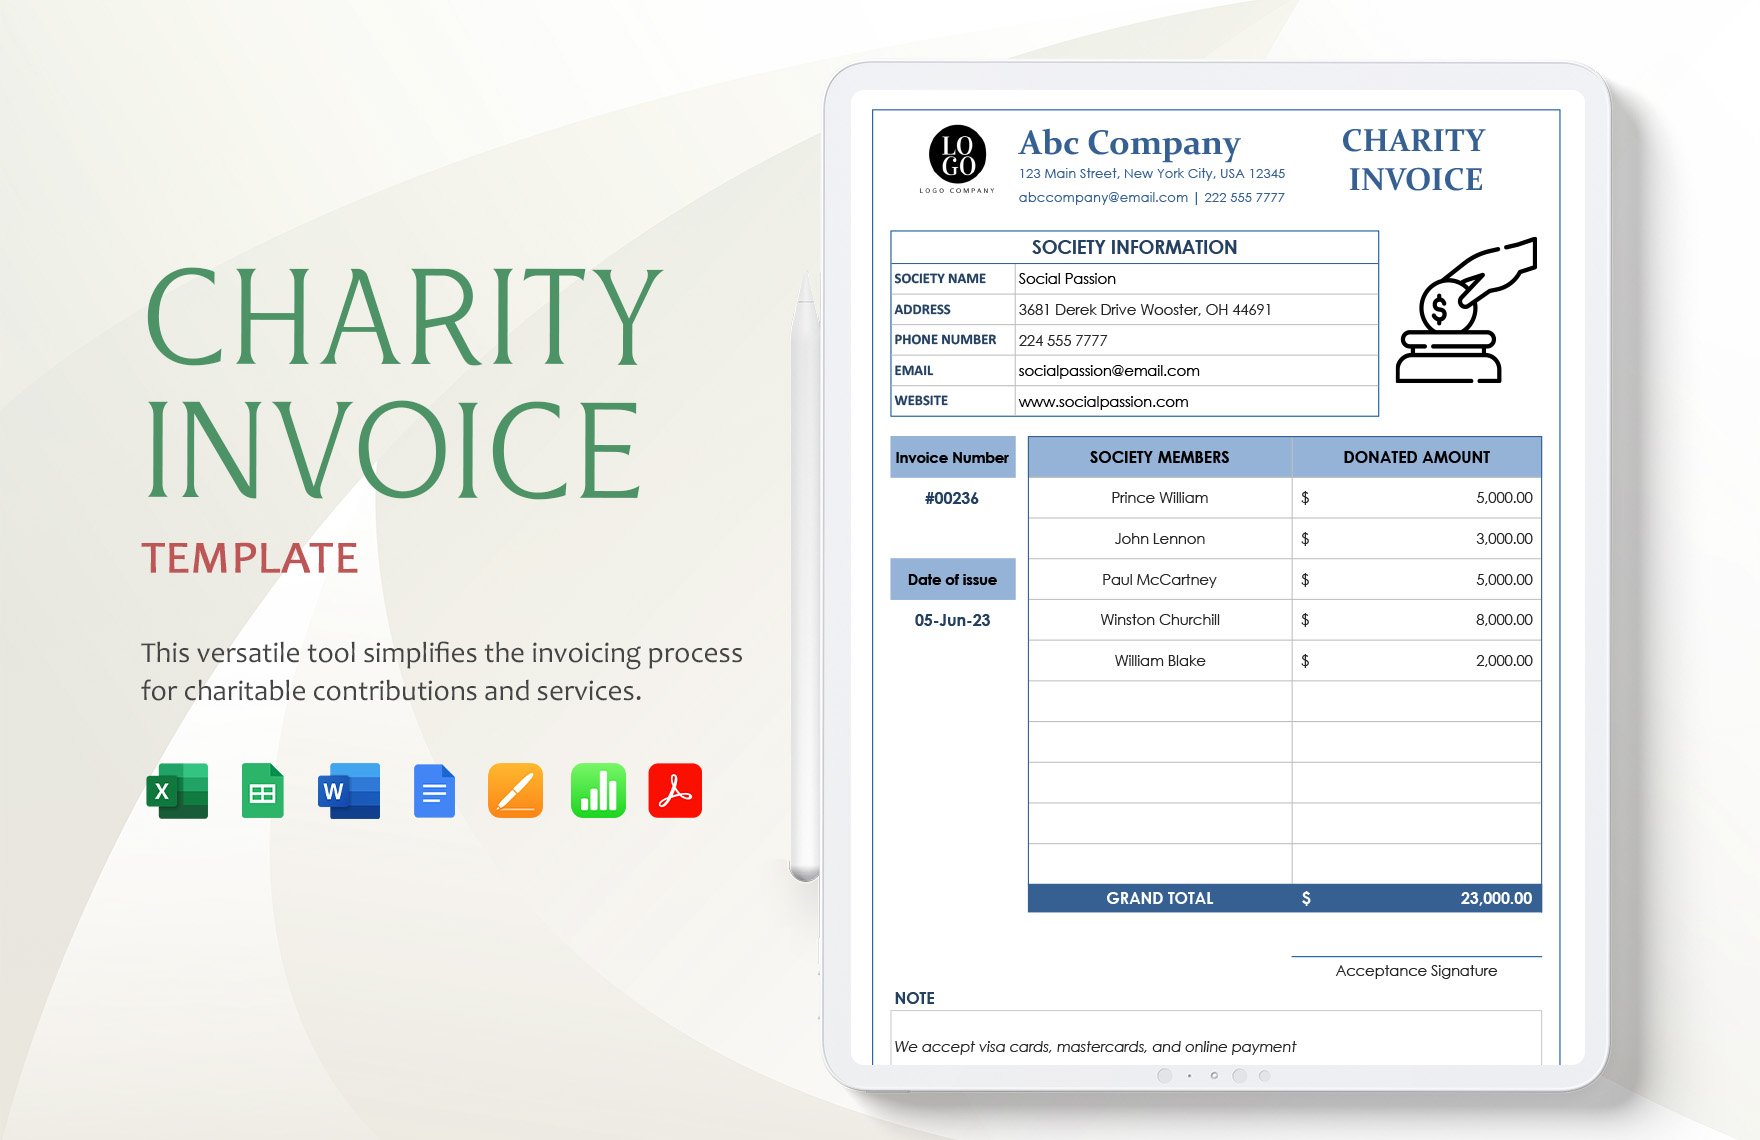 Charity Invoice Template in Word, Google Docs, Excel, PDF, Google Sheets, Apple Pages, Apple Numbers